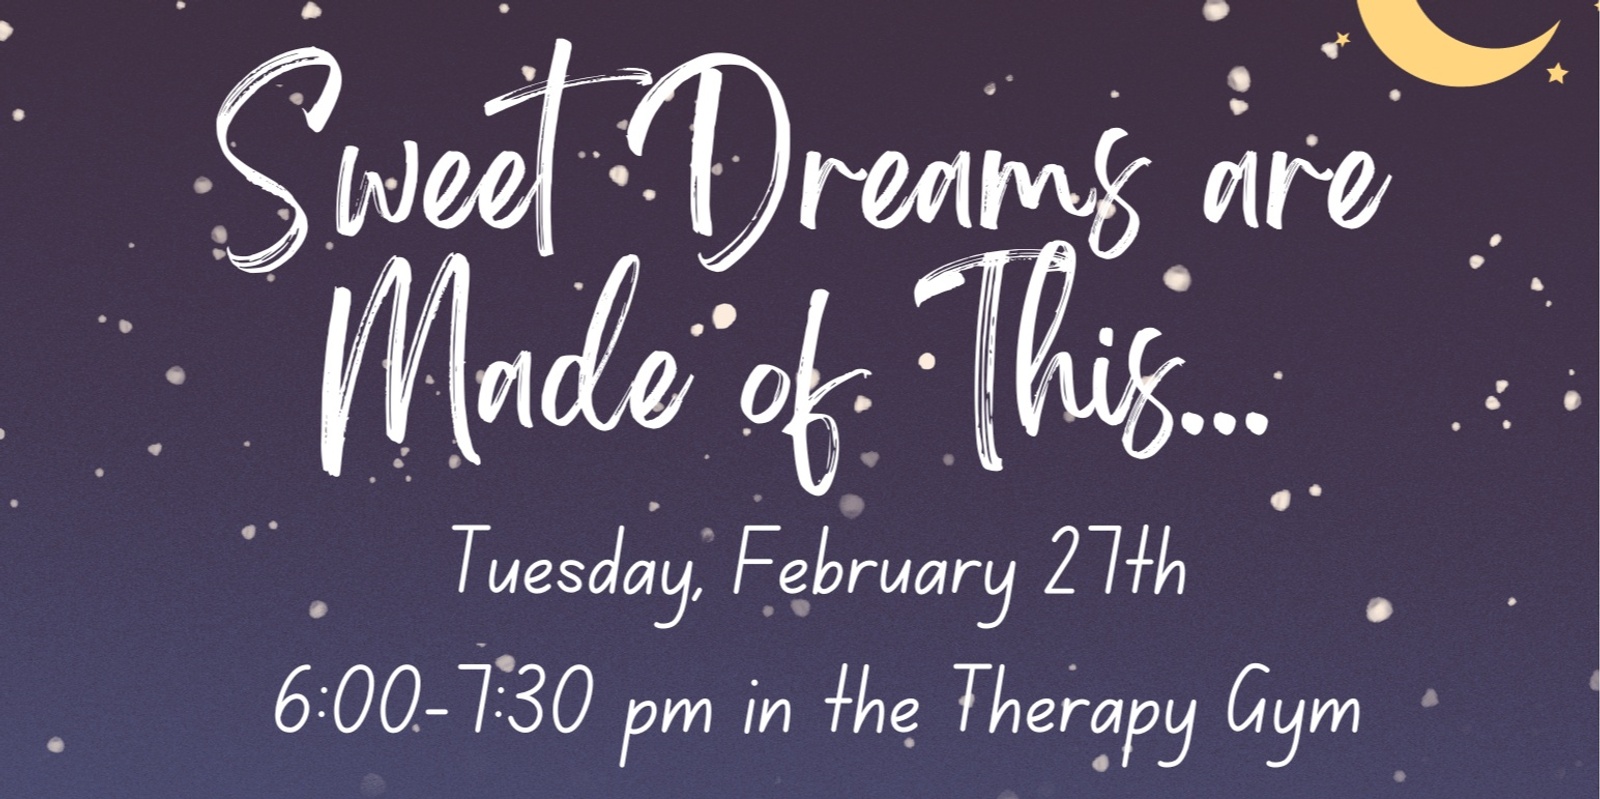 Banner image for Parent Workshop: Sweet dreams are made of this..